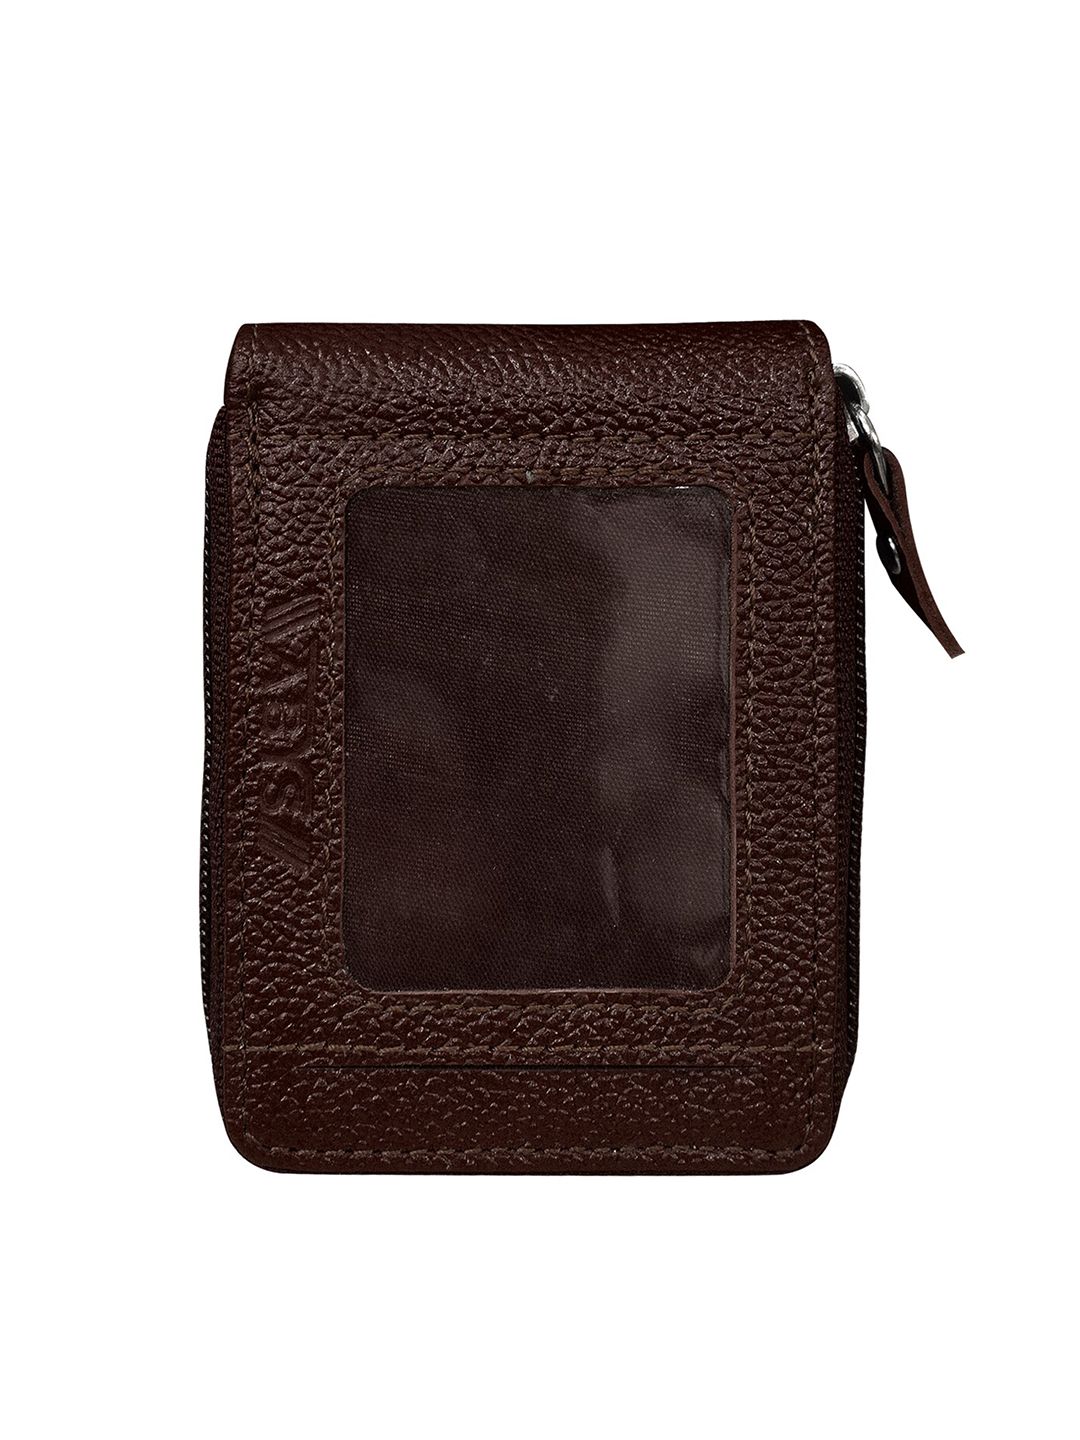 ABYS Unisex Coffee Brown Textured Leather Zip Around Wallet Price in India